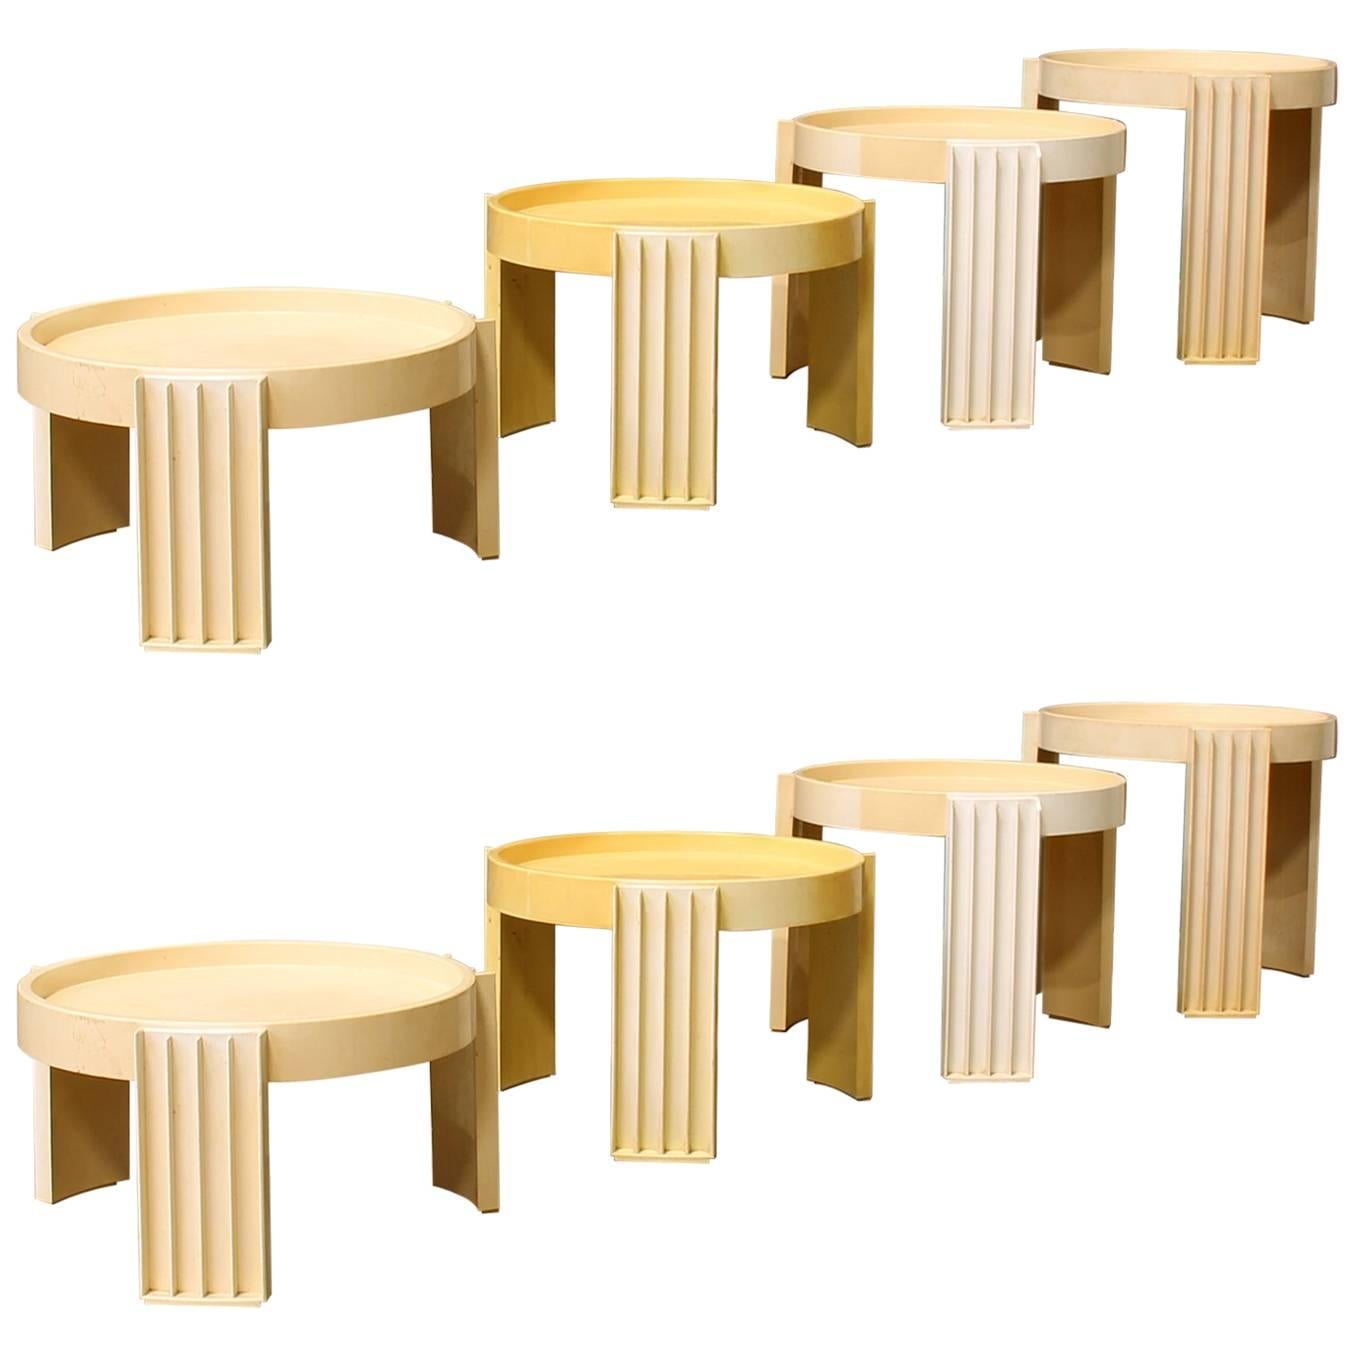 1967, Gianfranco Frattini for Cassina, 8 Pieces of Marema Stacking Tables